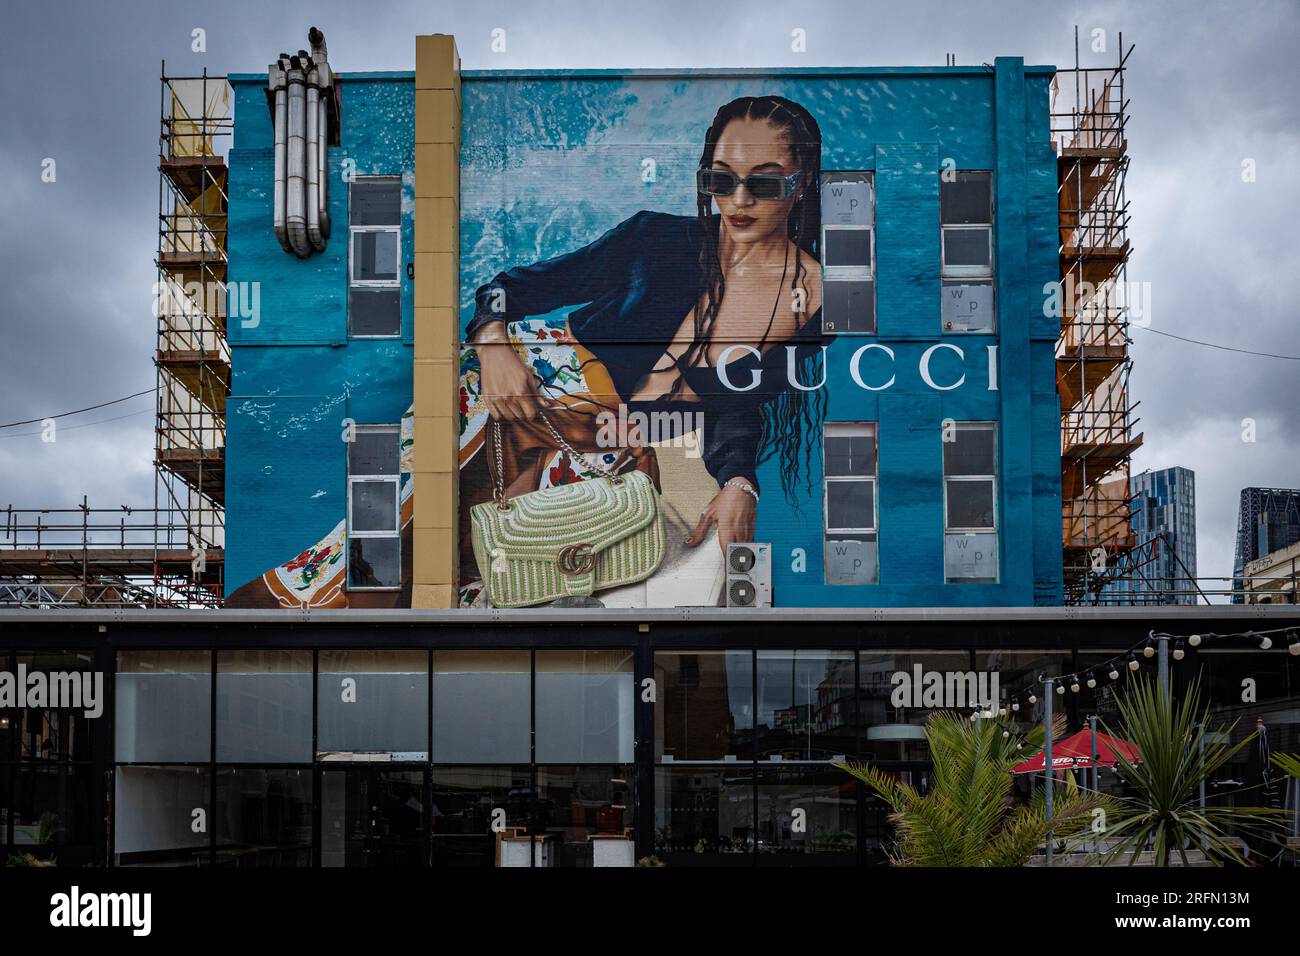 Gucci Mural Ely's Yard in the Old Truman Brewery off Brick Lane East London. Gucci Mural Advert London. Gucci Summer 2023 campaign. Gucci Artwall. Stock Photo